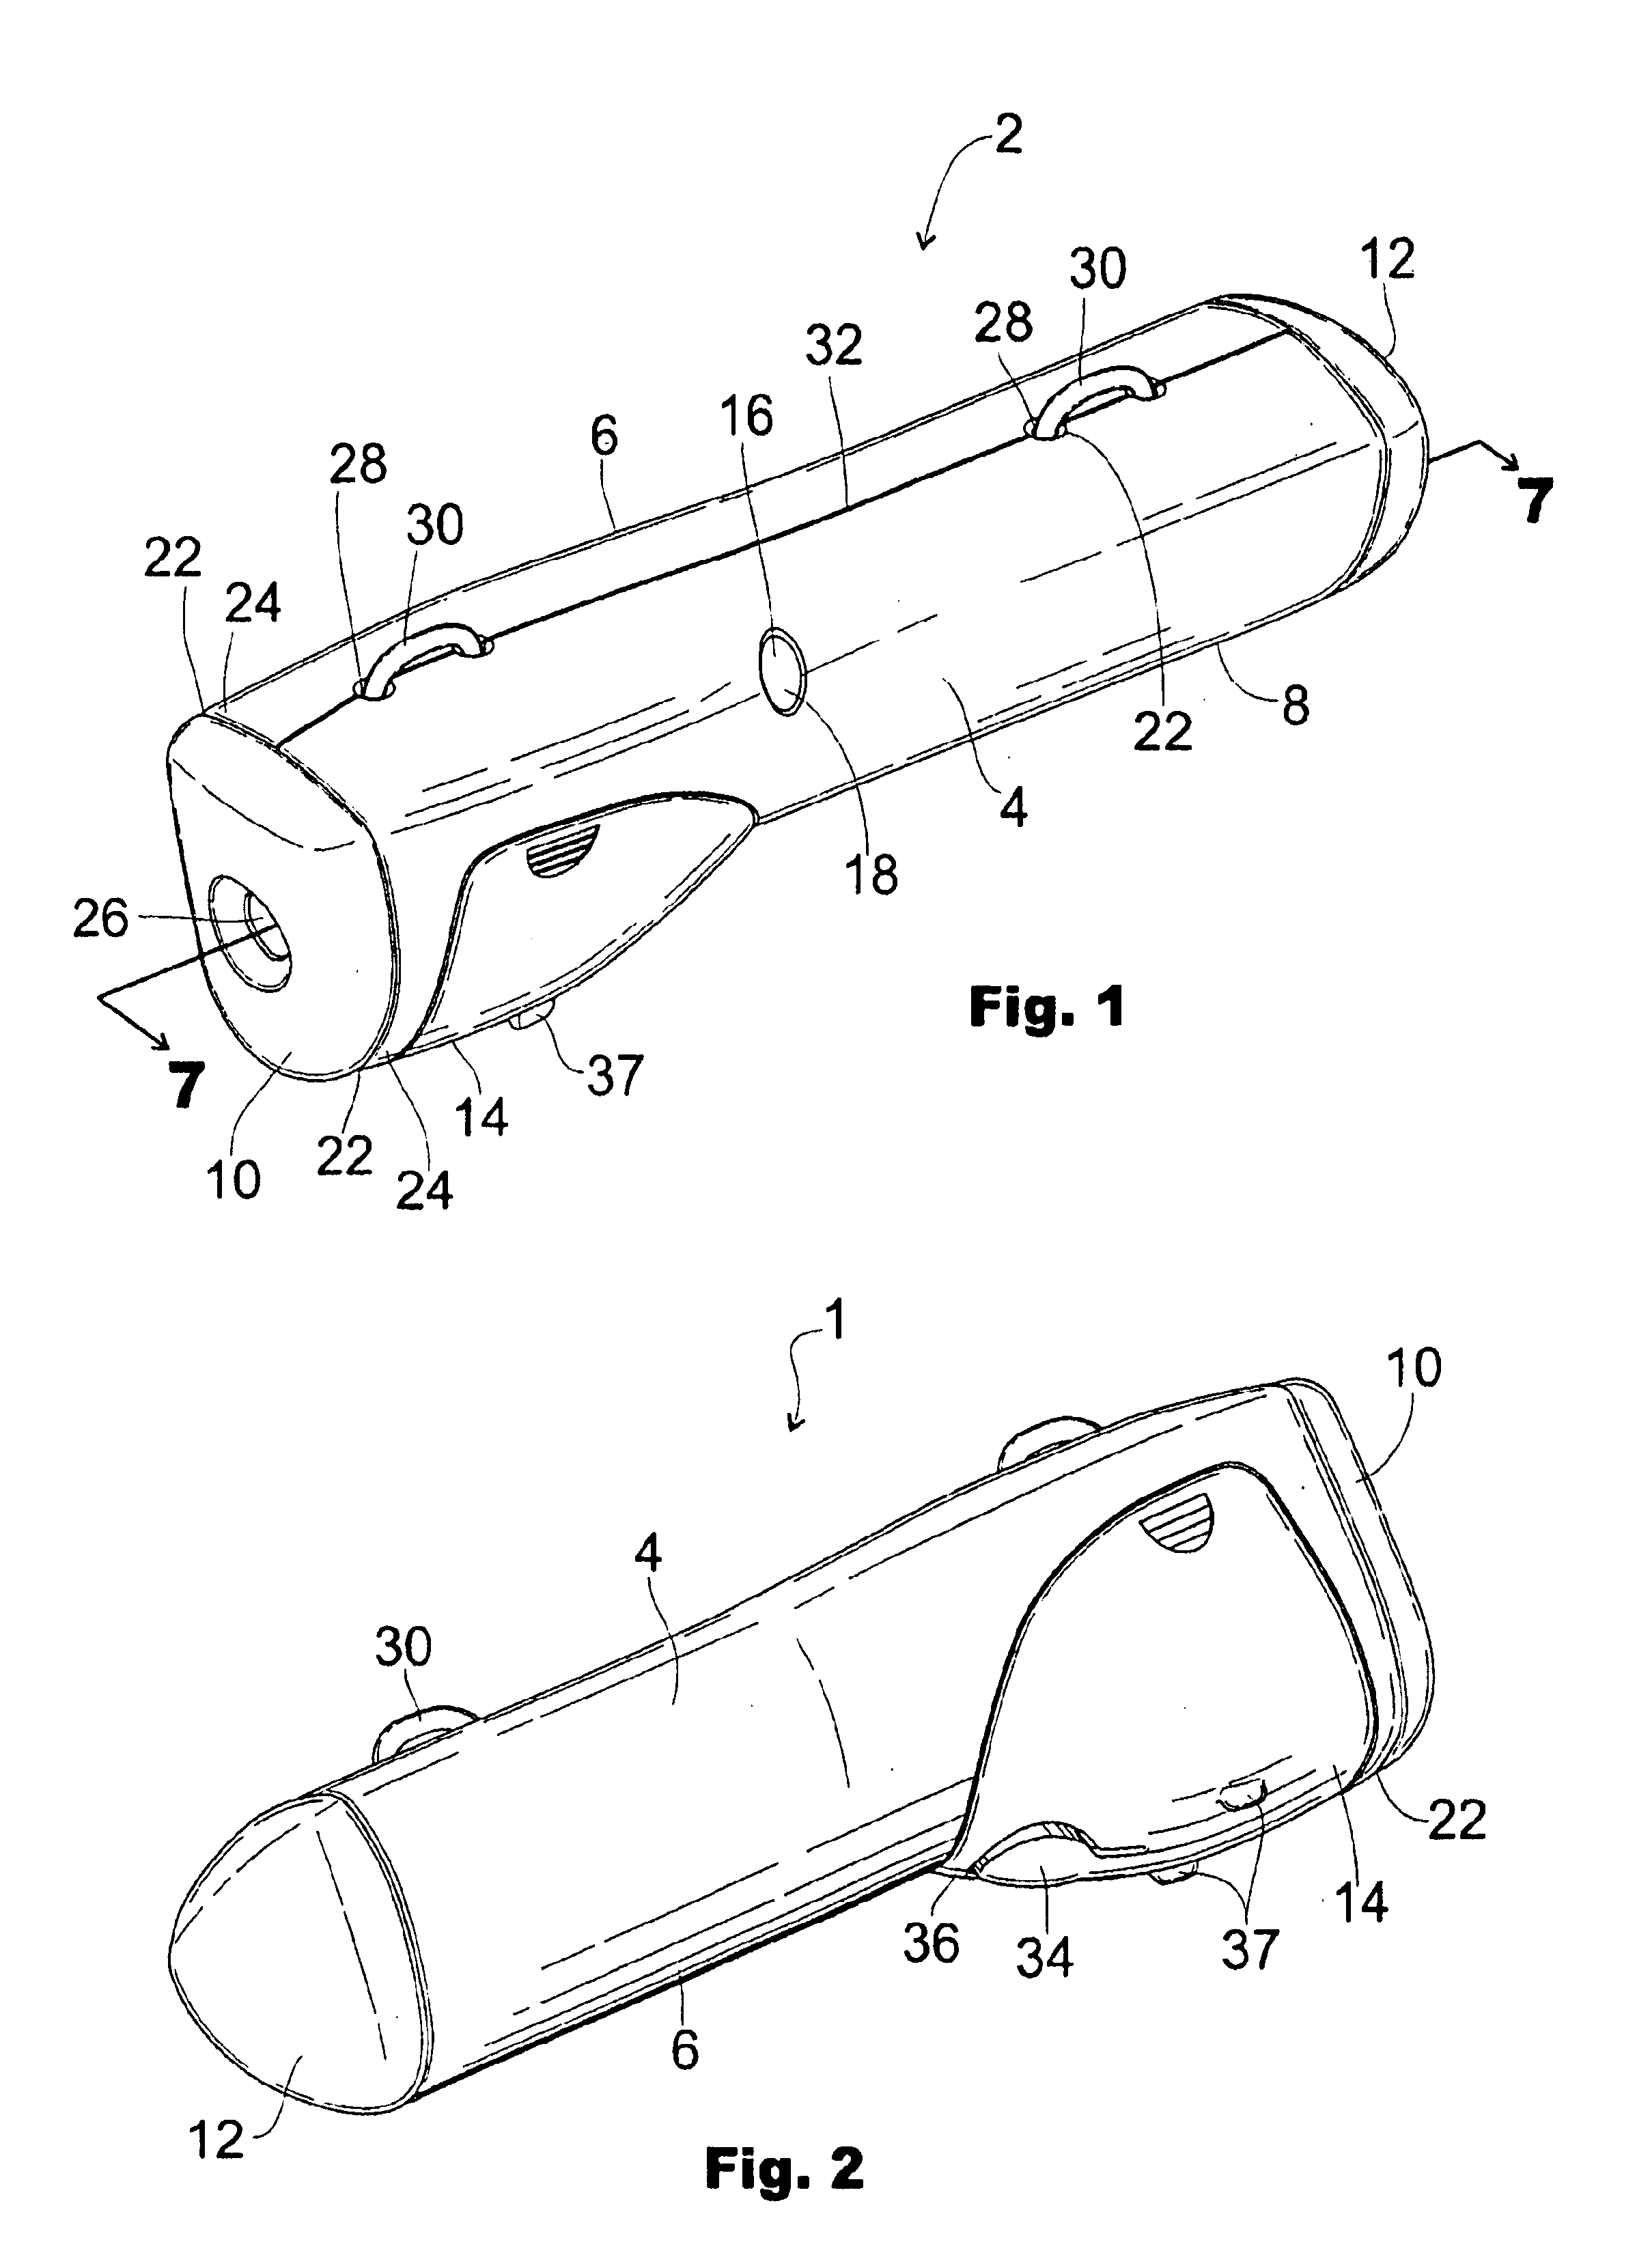 Portable handheld sharpener with loop attachment